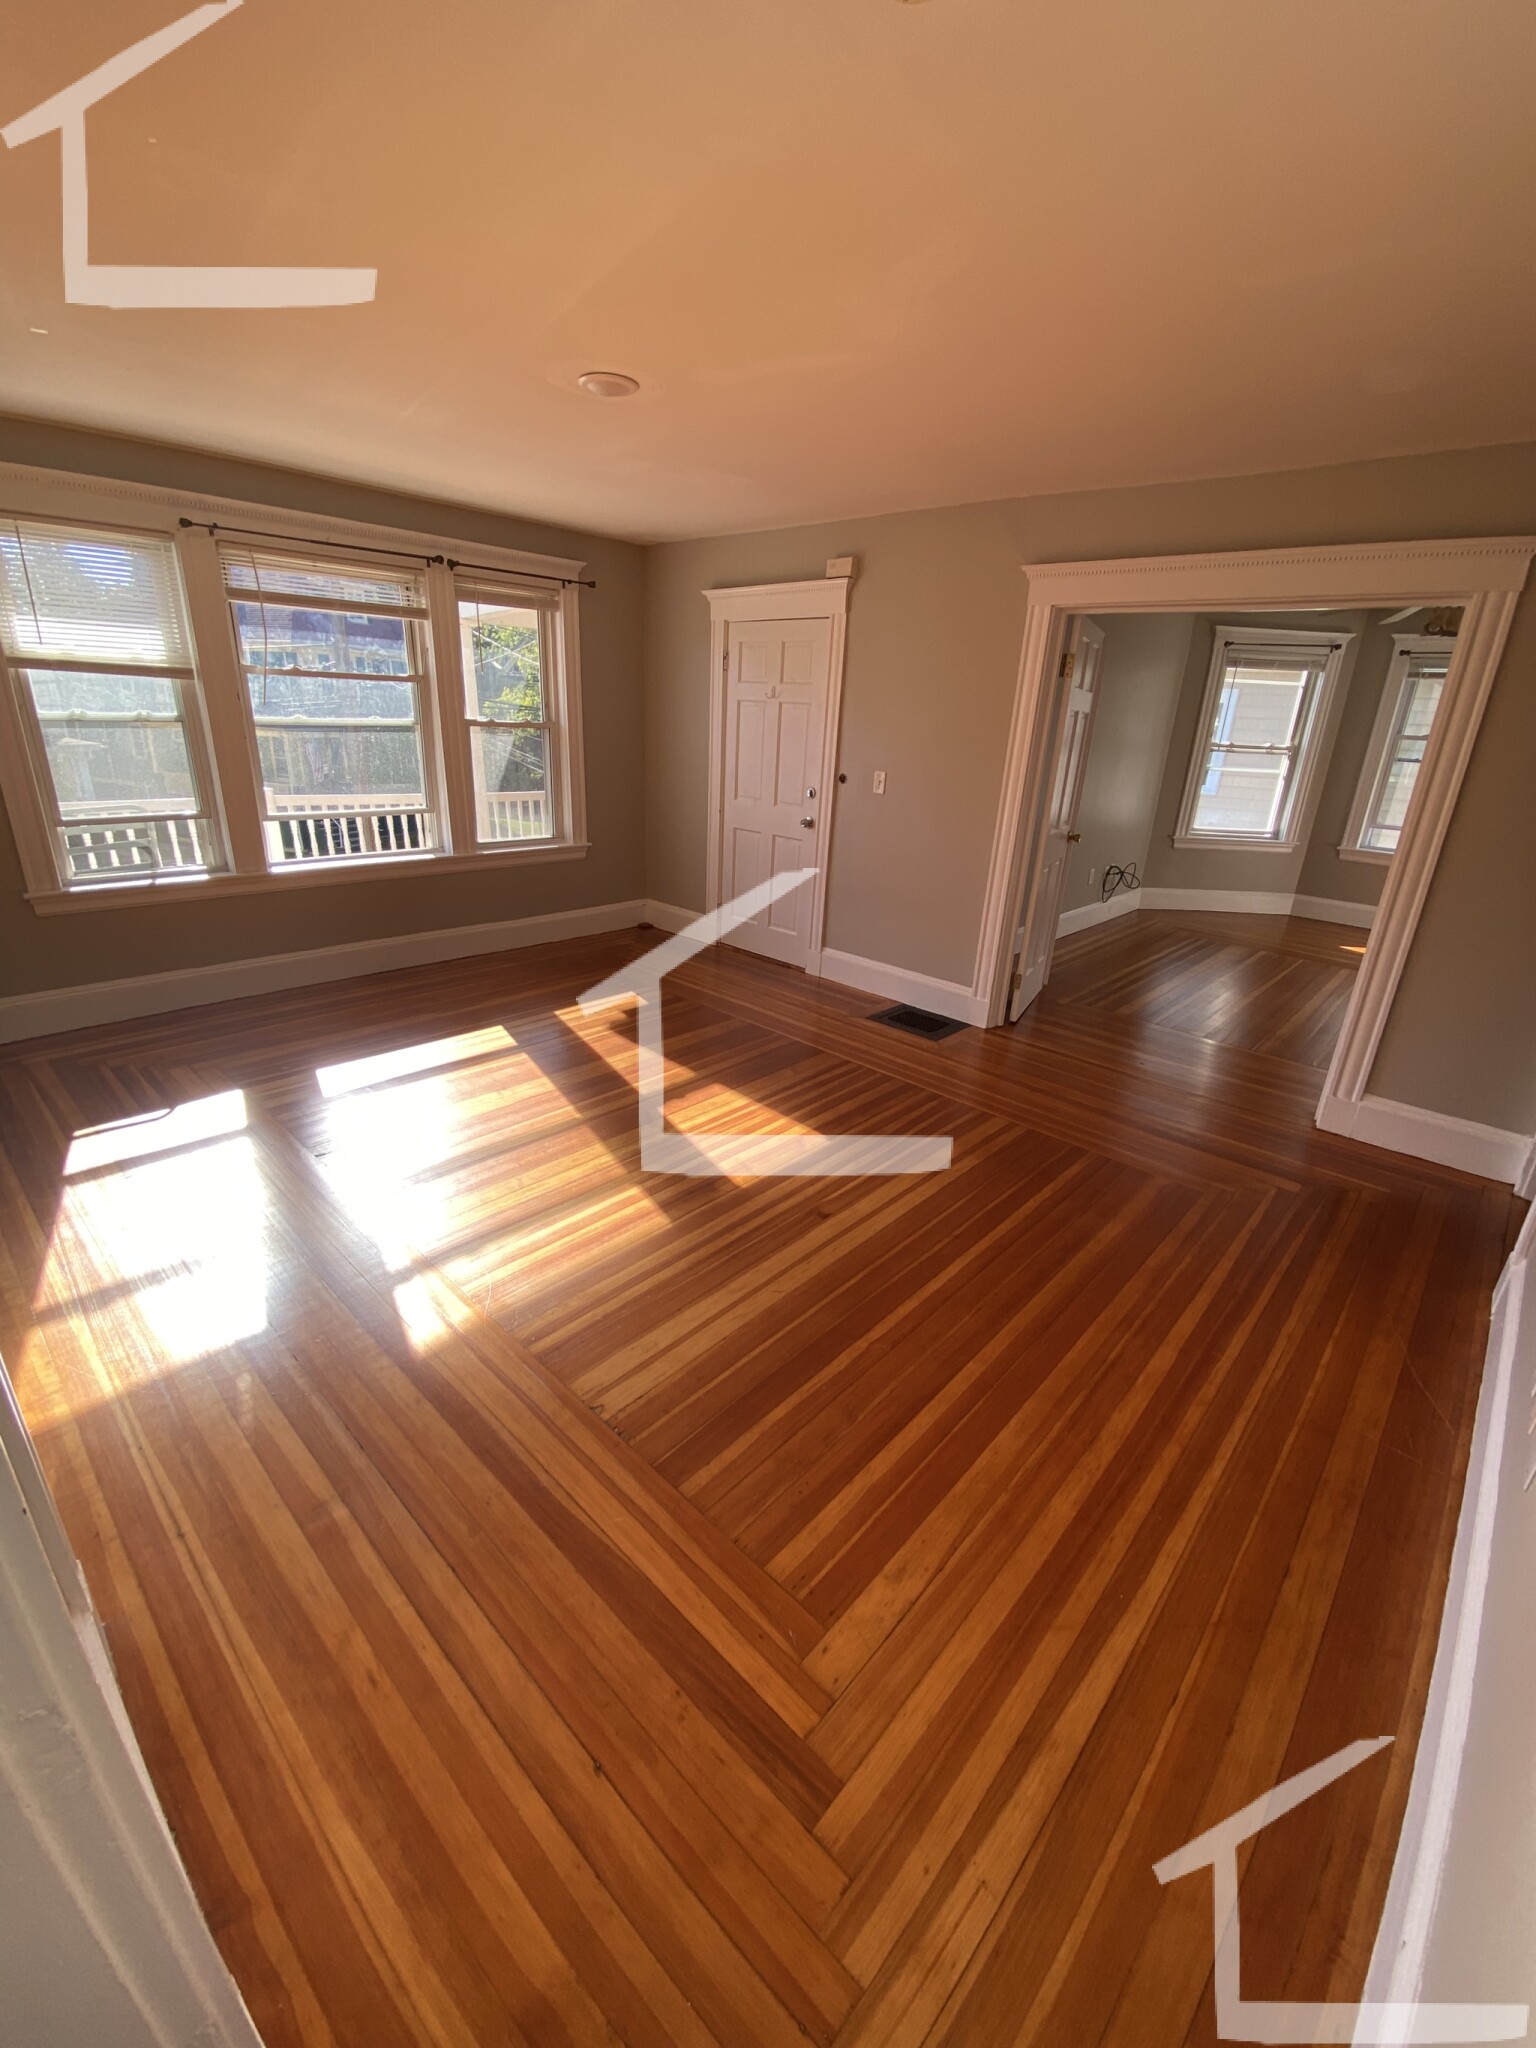 Photos of apartment on Taft St.,Quincy MA 02169